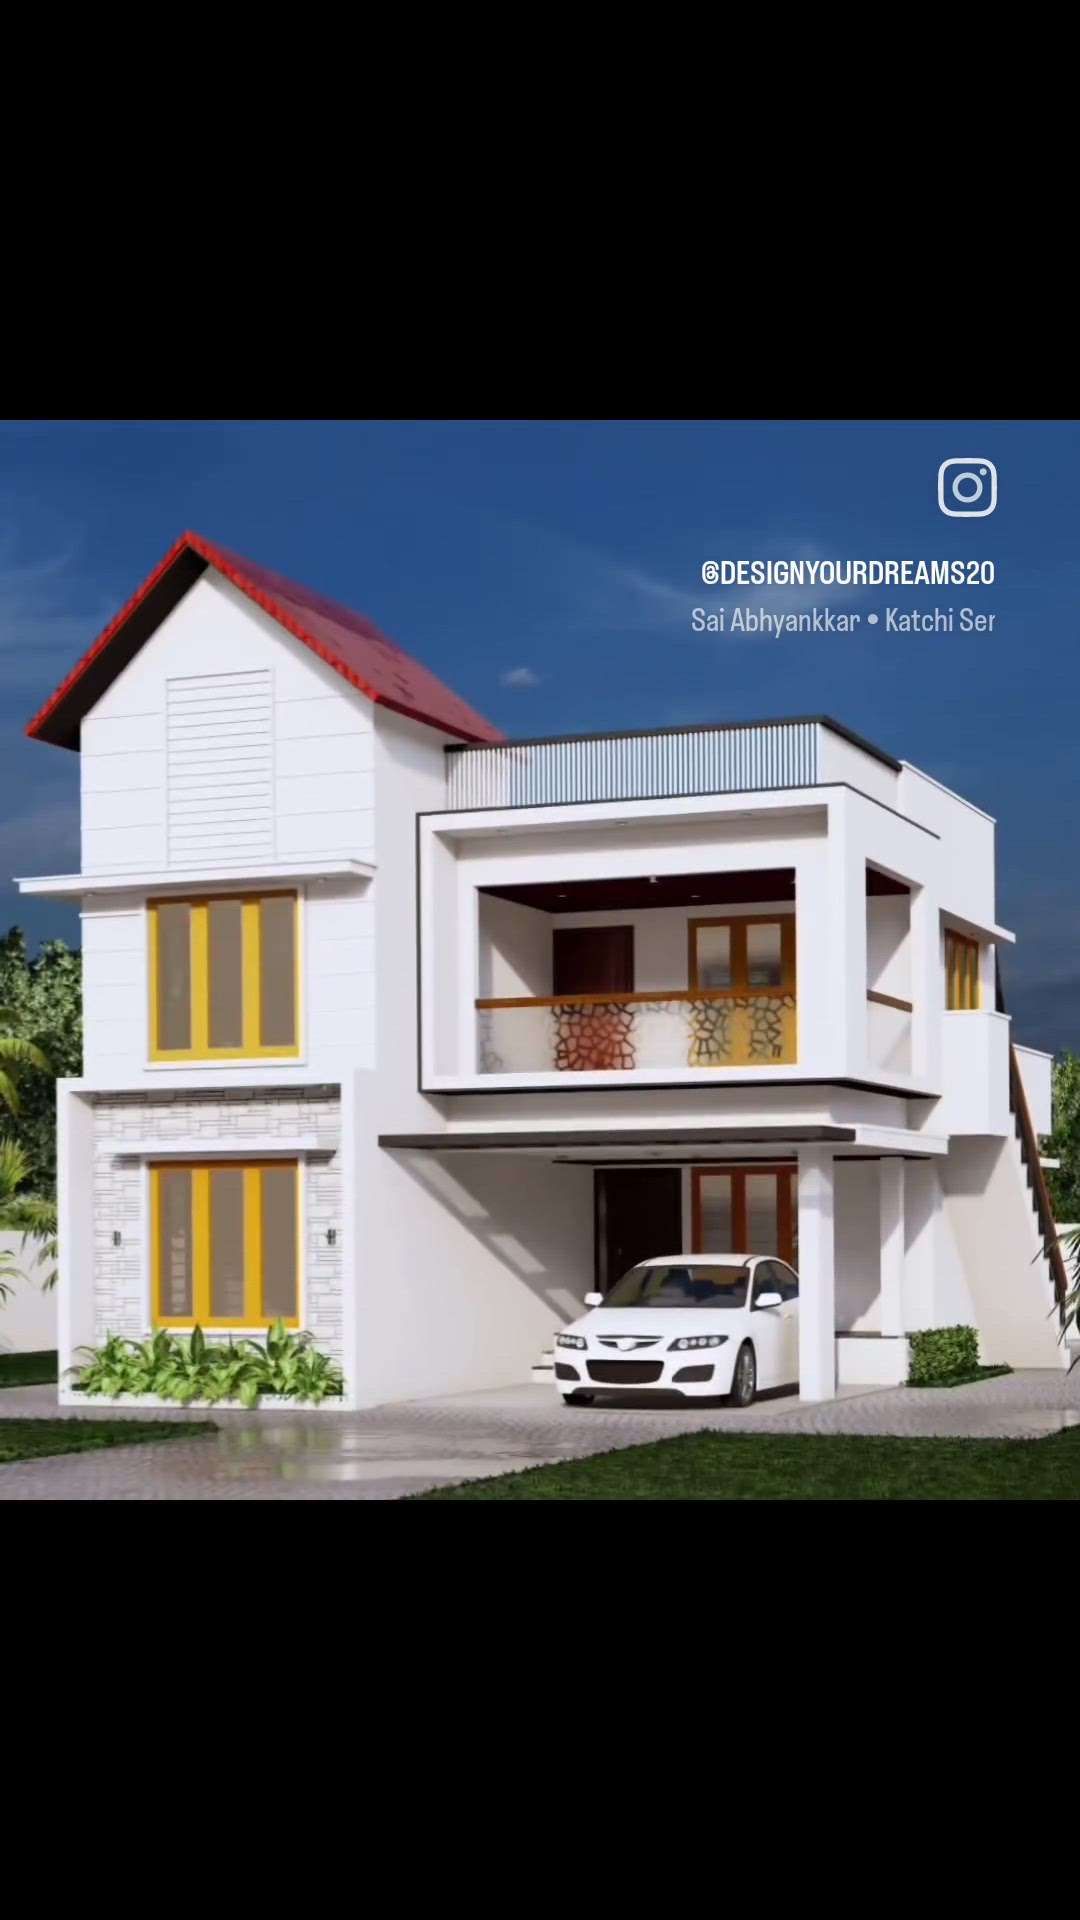 Mixed Roof Residence Model for client at Elipode, Trivandrum.
 #ElevationHome  #exterior_Work  #3d  #Cad  #3delevation🏠  #exterior3D  #exteriordecor  #High_quality_Elevation  #trivandrumhome  #keralaveedu  #keralahousedesigns